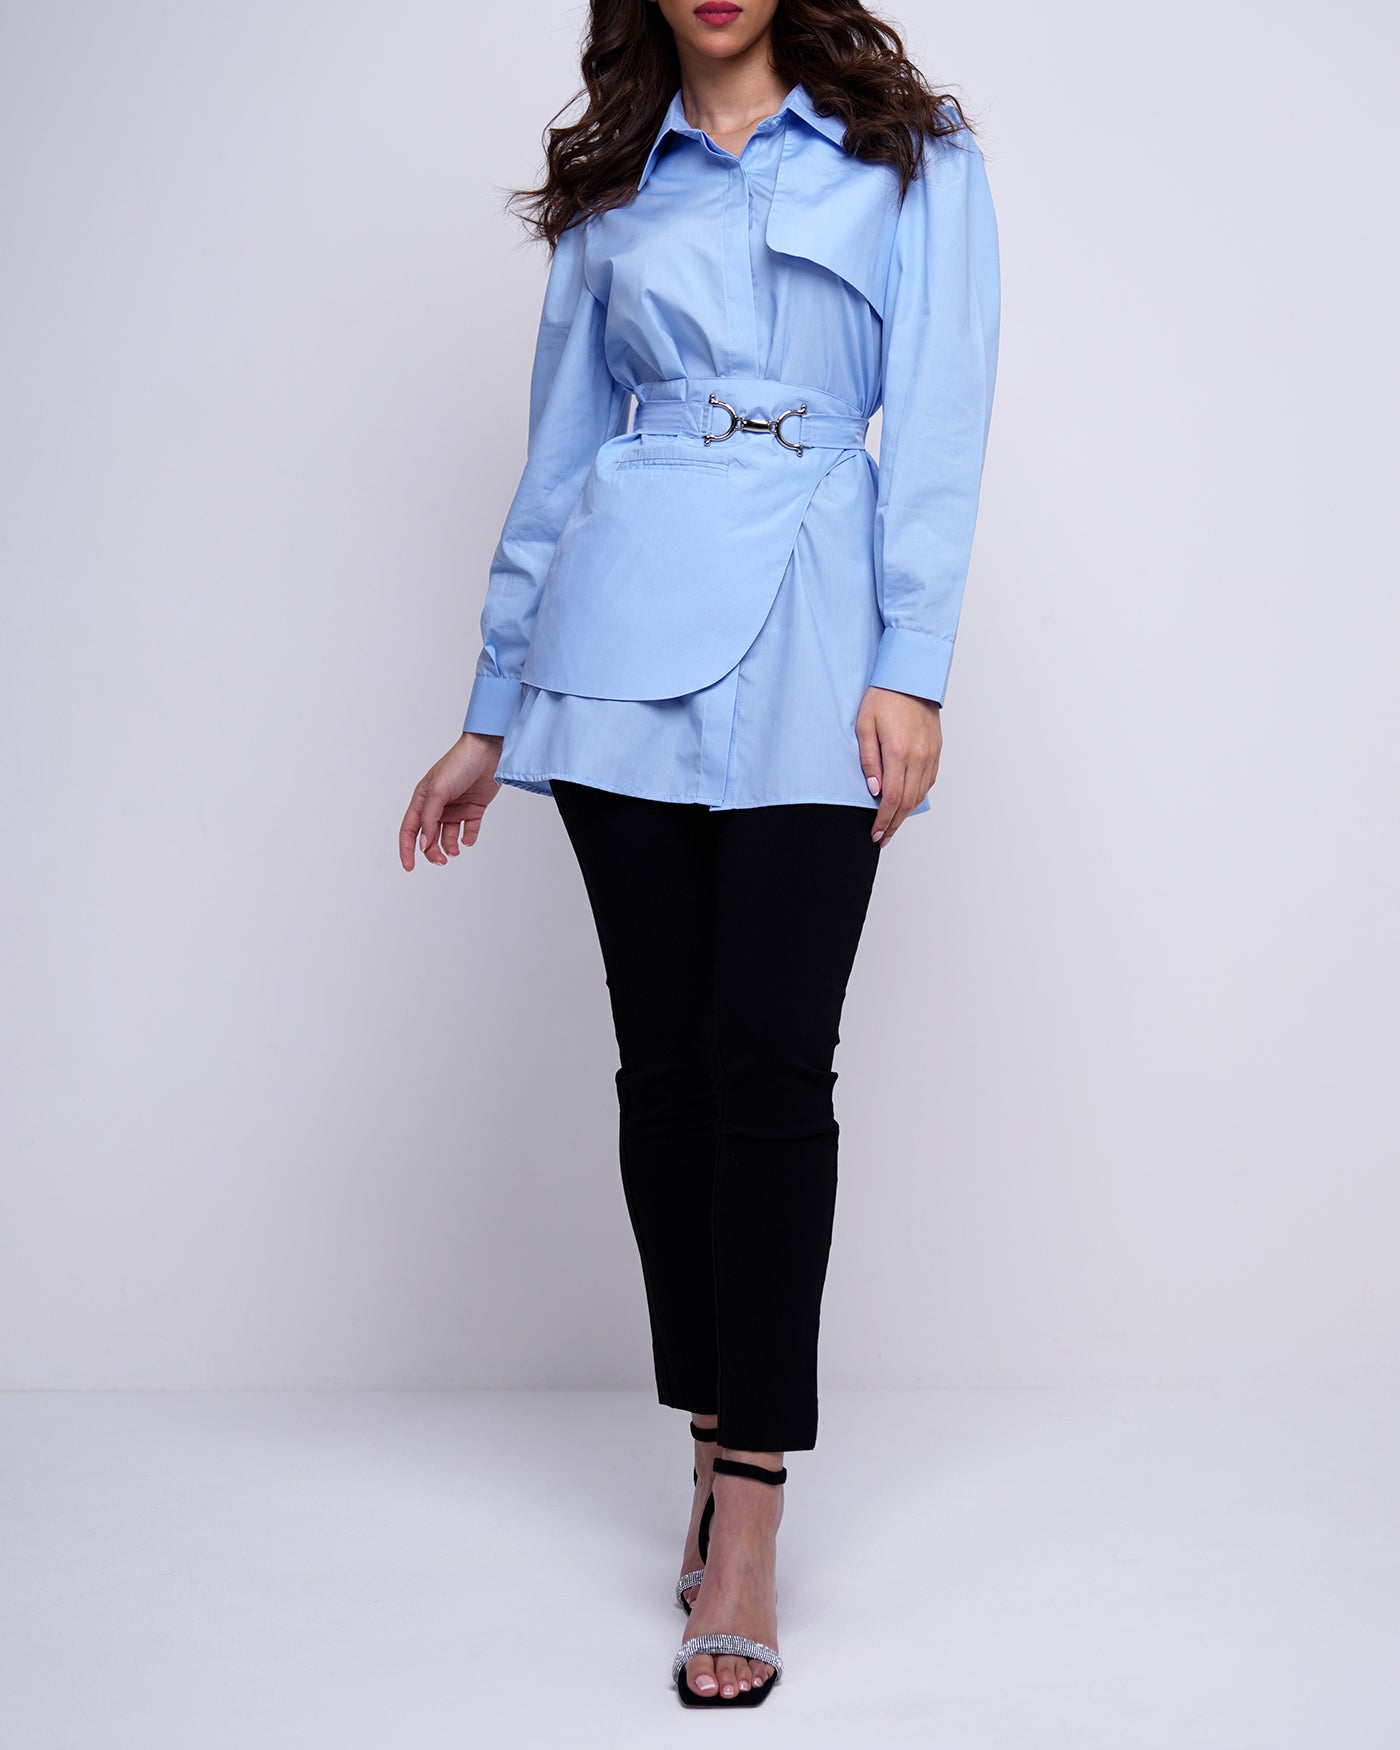 Trench shirt with side peplum belt in blue